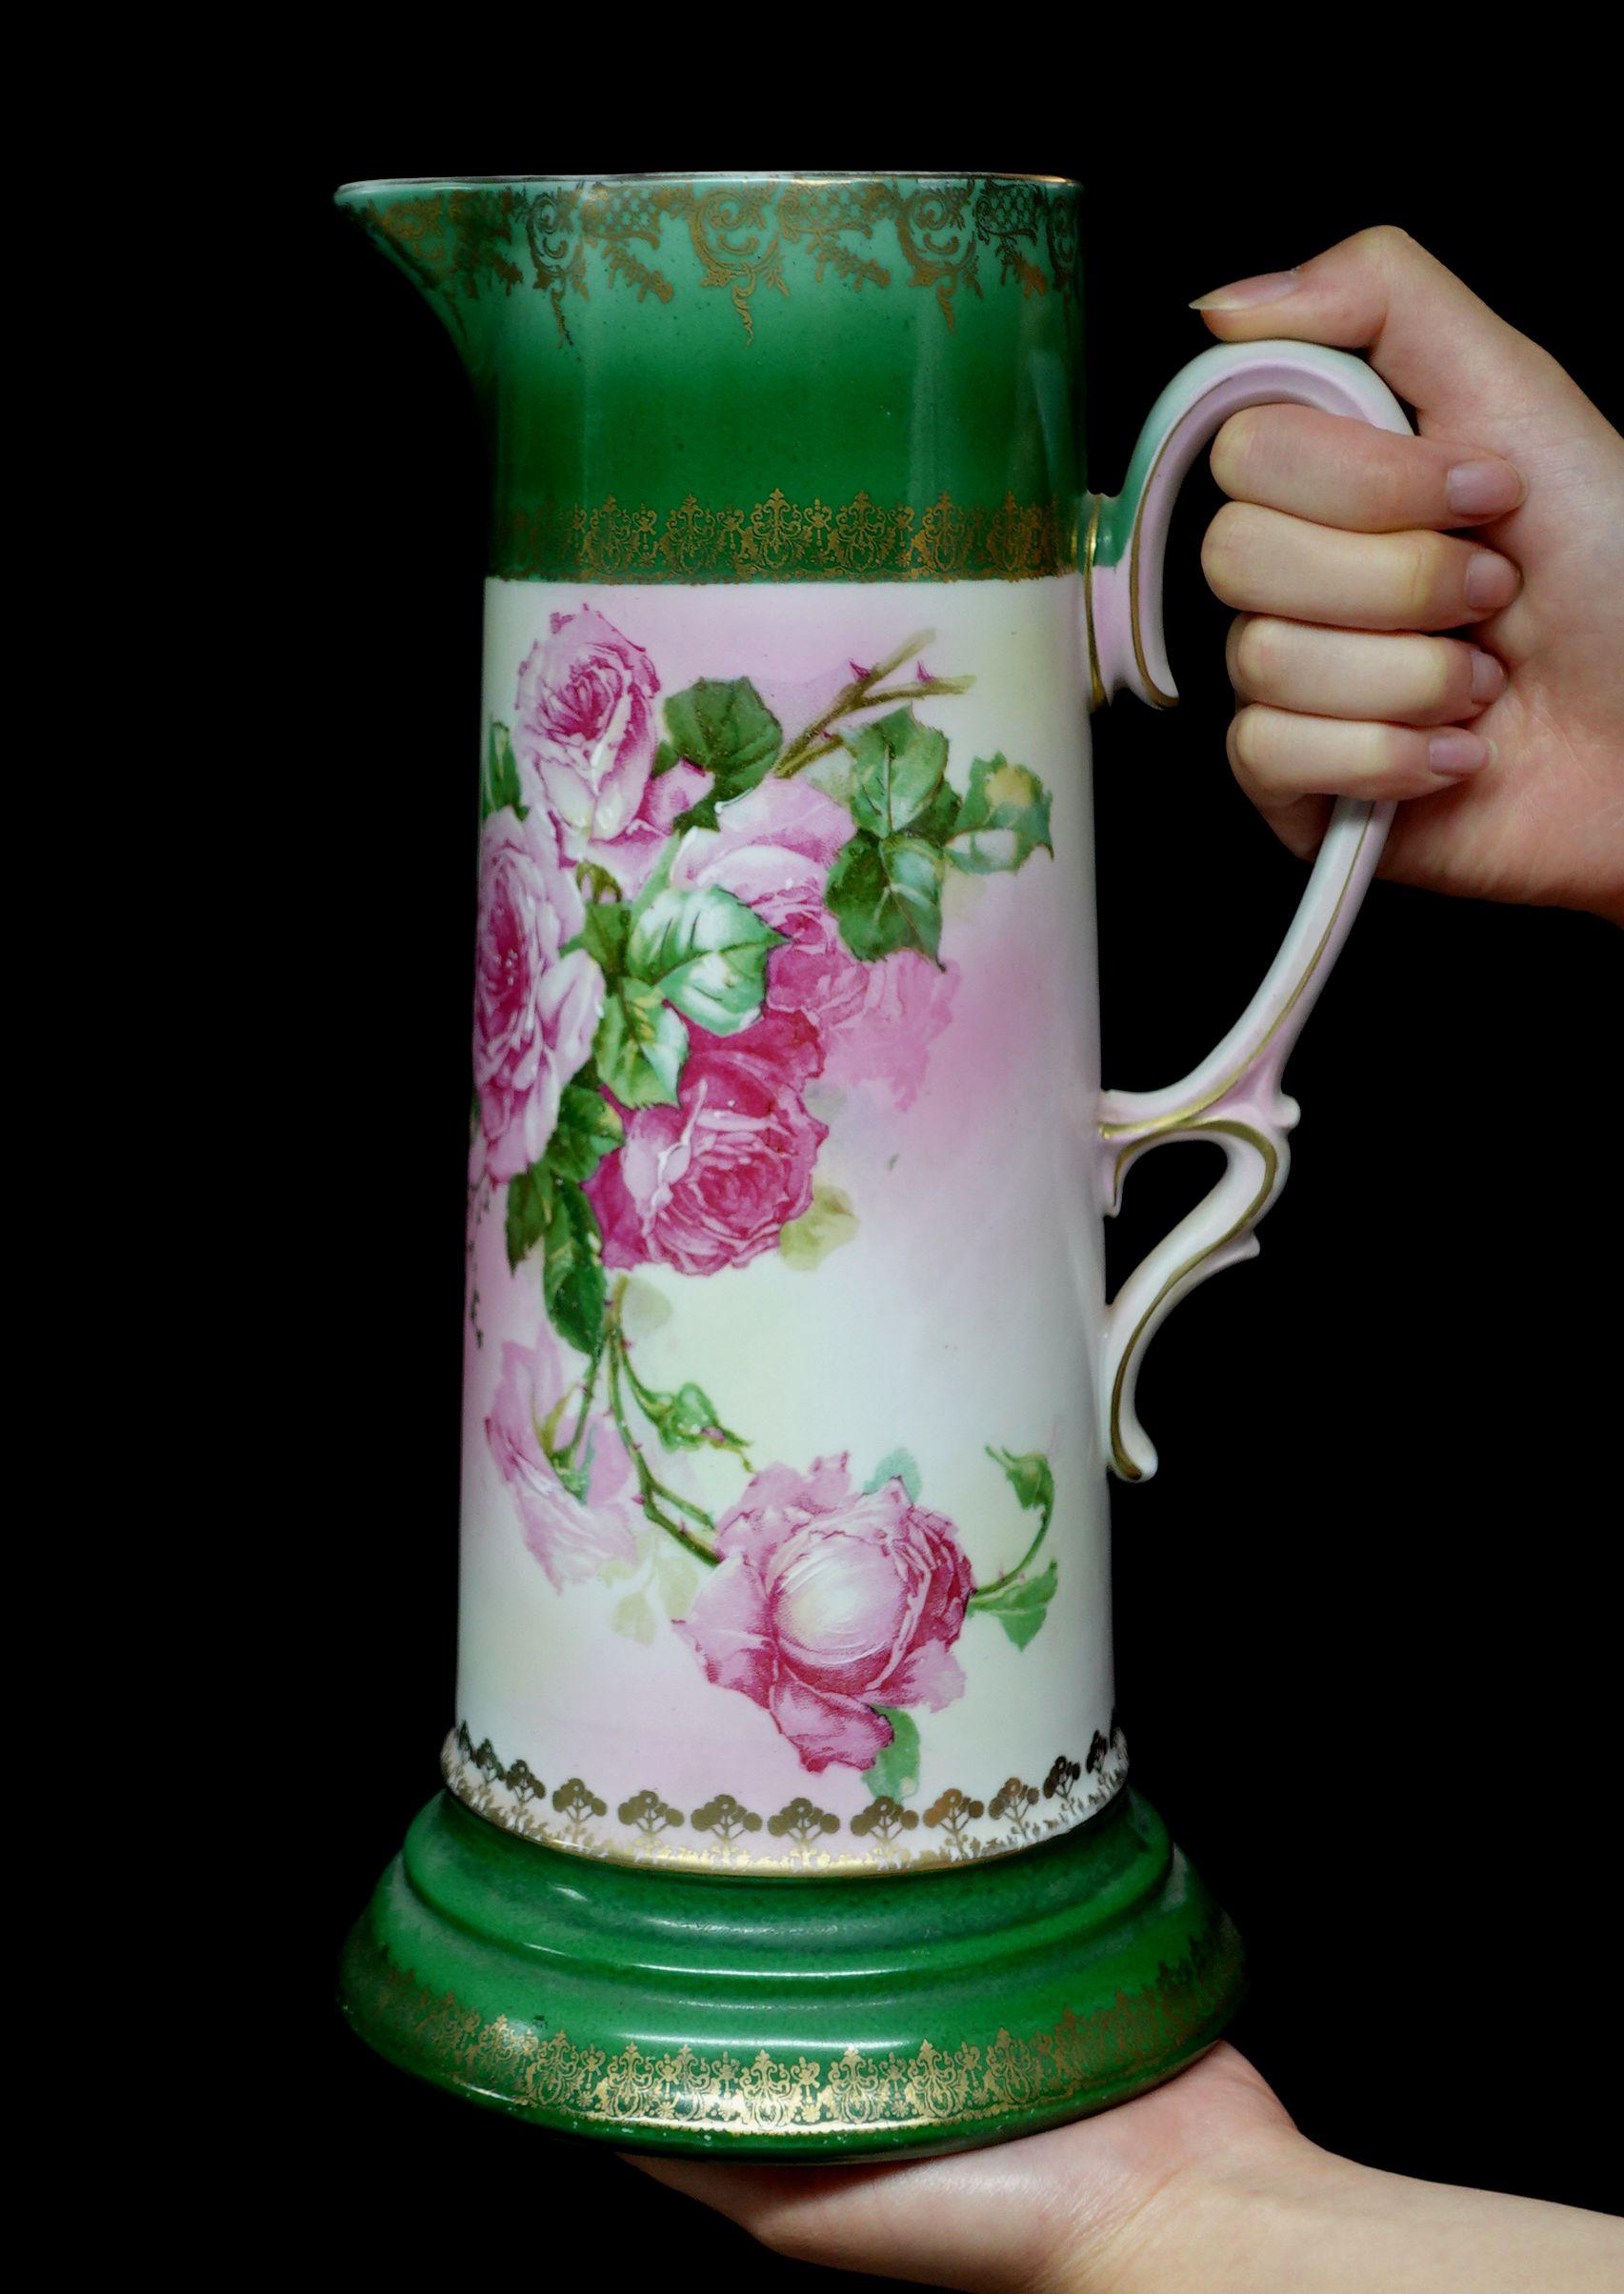 A wonderful antique New Habsburg Austria Large Tankard absolutely 100% hand-painted floral, roses in red with rich green leaves presentation. The two colors of pink and light mixed together throughout the entire porcelain brings more attention to